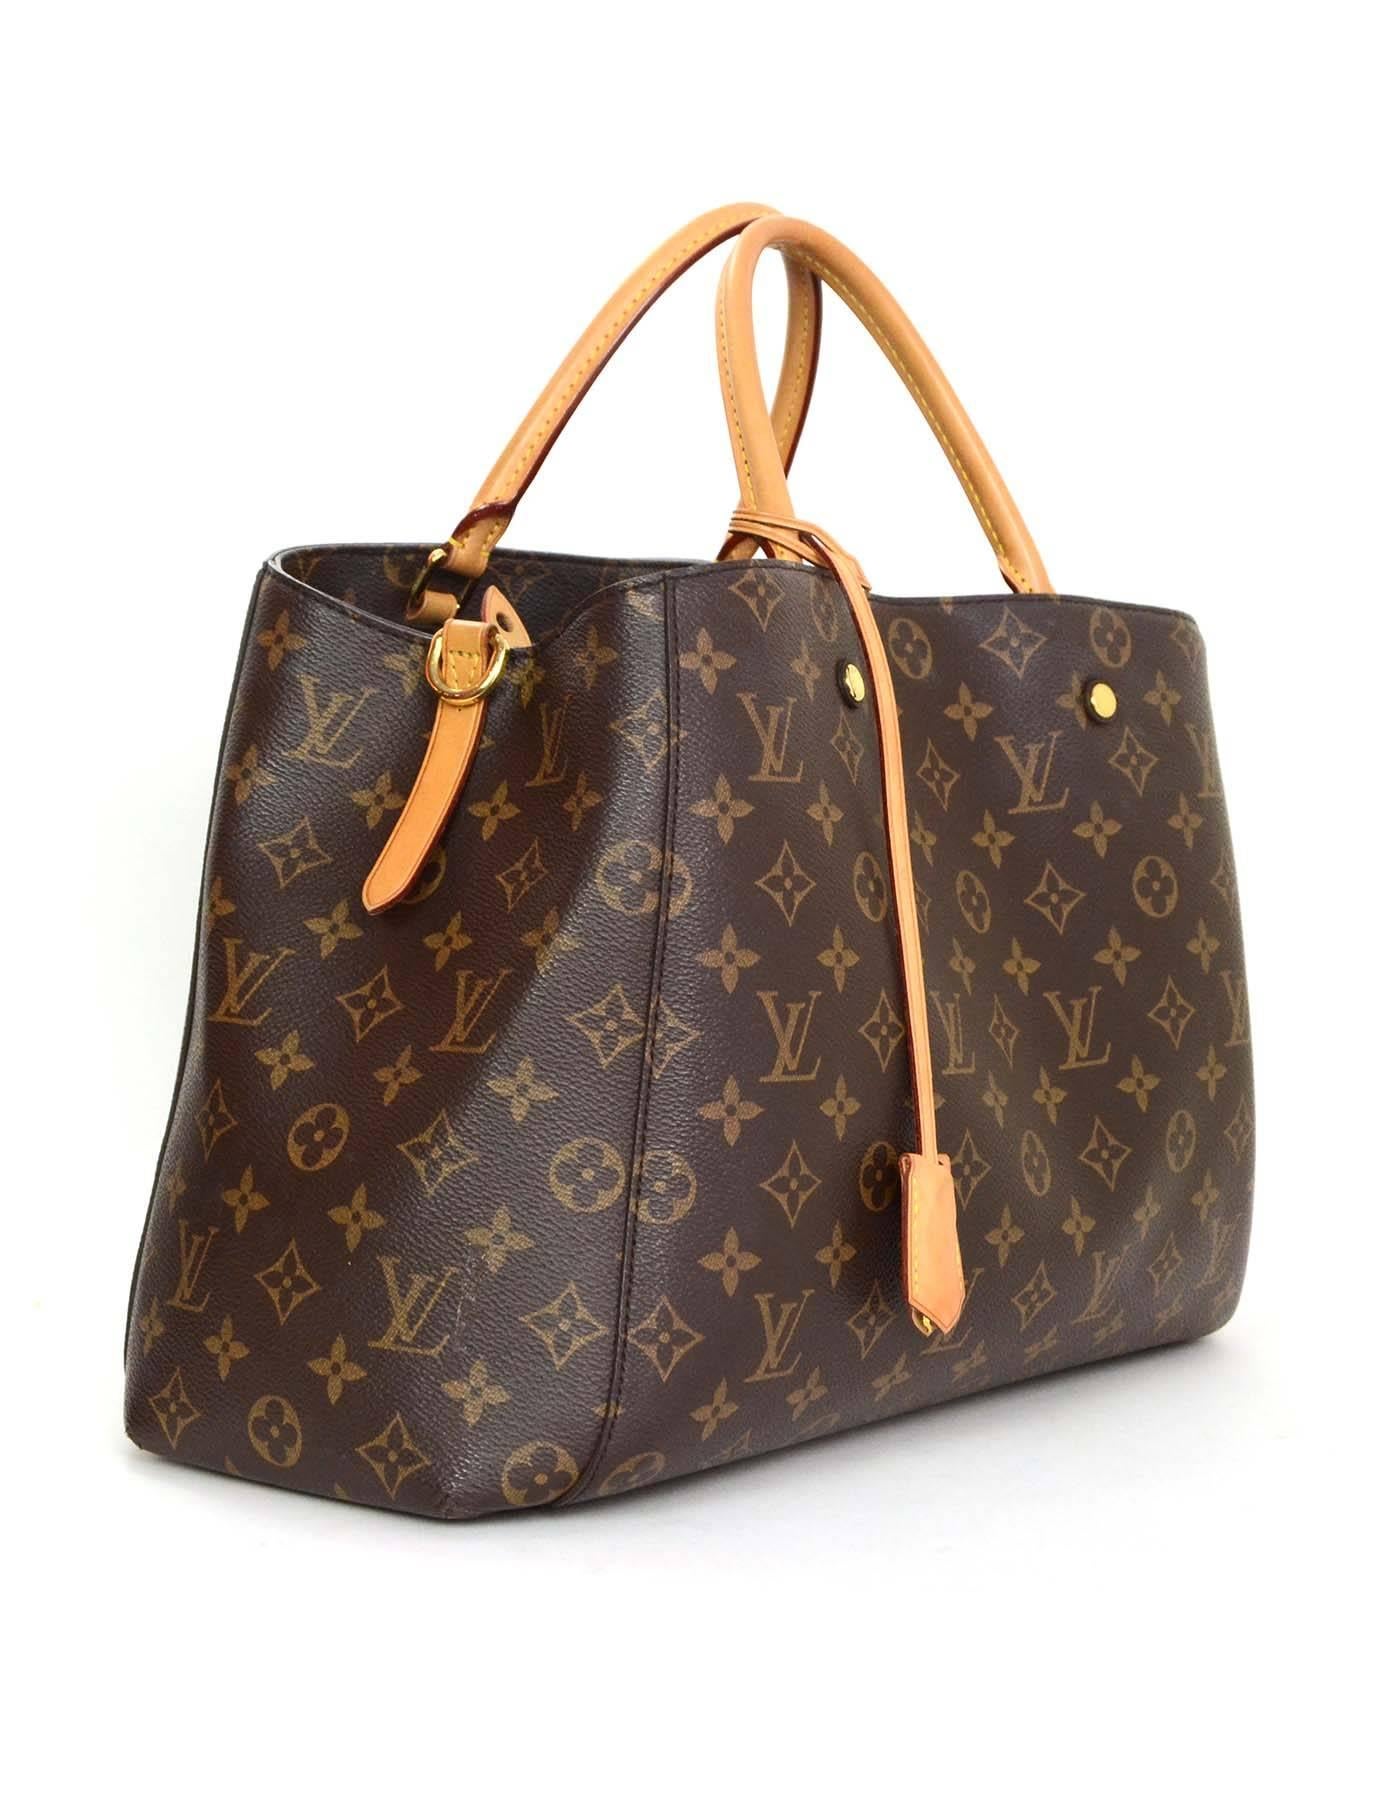 Louis Vuitton Monogram Montaigne GM Bag

Features removable monogram shoulder strap and lock, key and clochette

    Made In: U.S.A
    Year of Production: 2014
    Materials: Canvas and leather
    Lining: Burgundy microfiber
    Hardware: